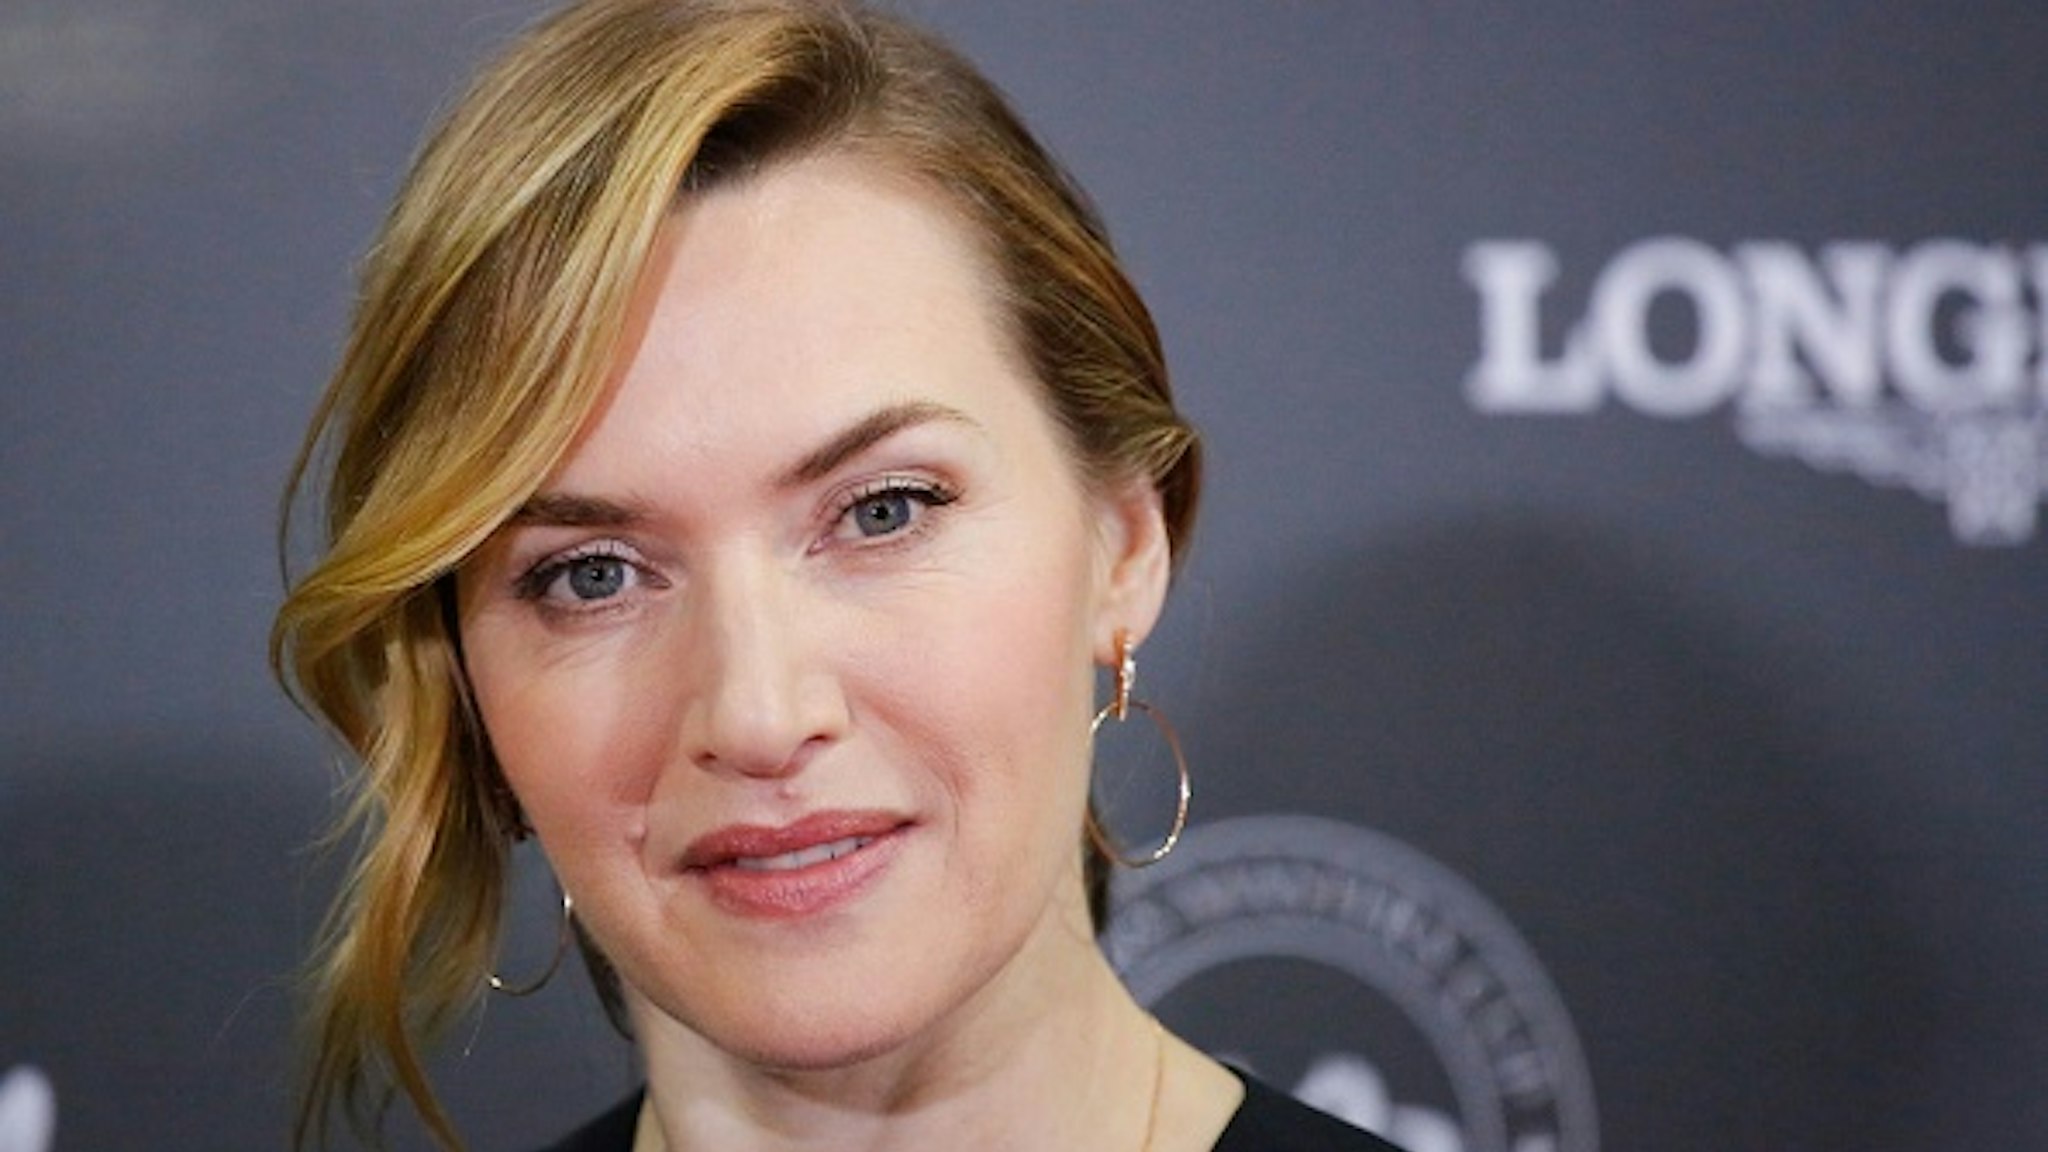 Kate Winslet attends the Longines Masters of New York at Nassau Coliseum on April 27, 2018 in Uniondale New York